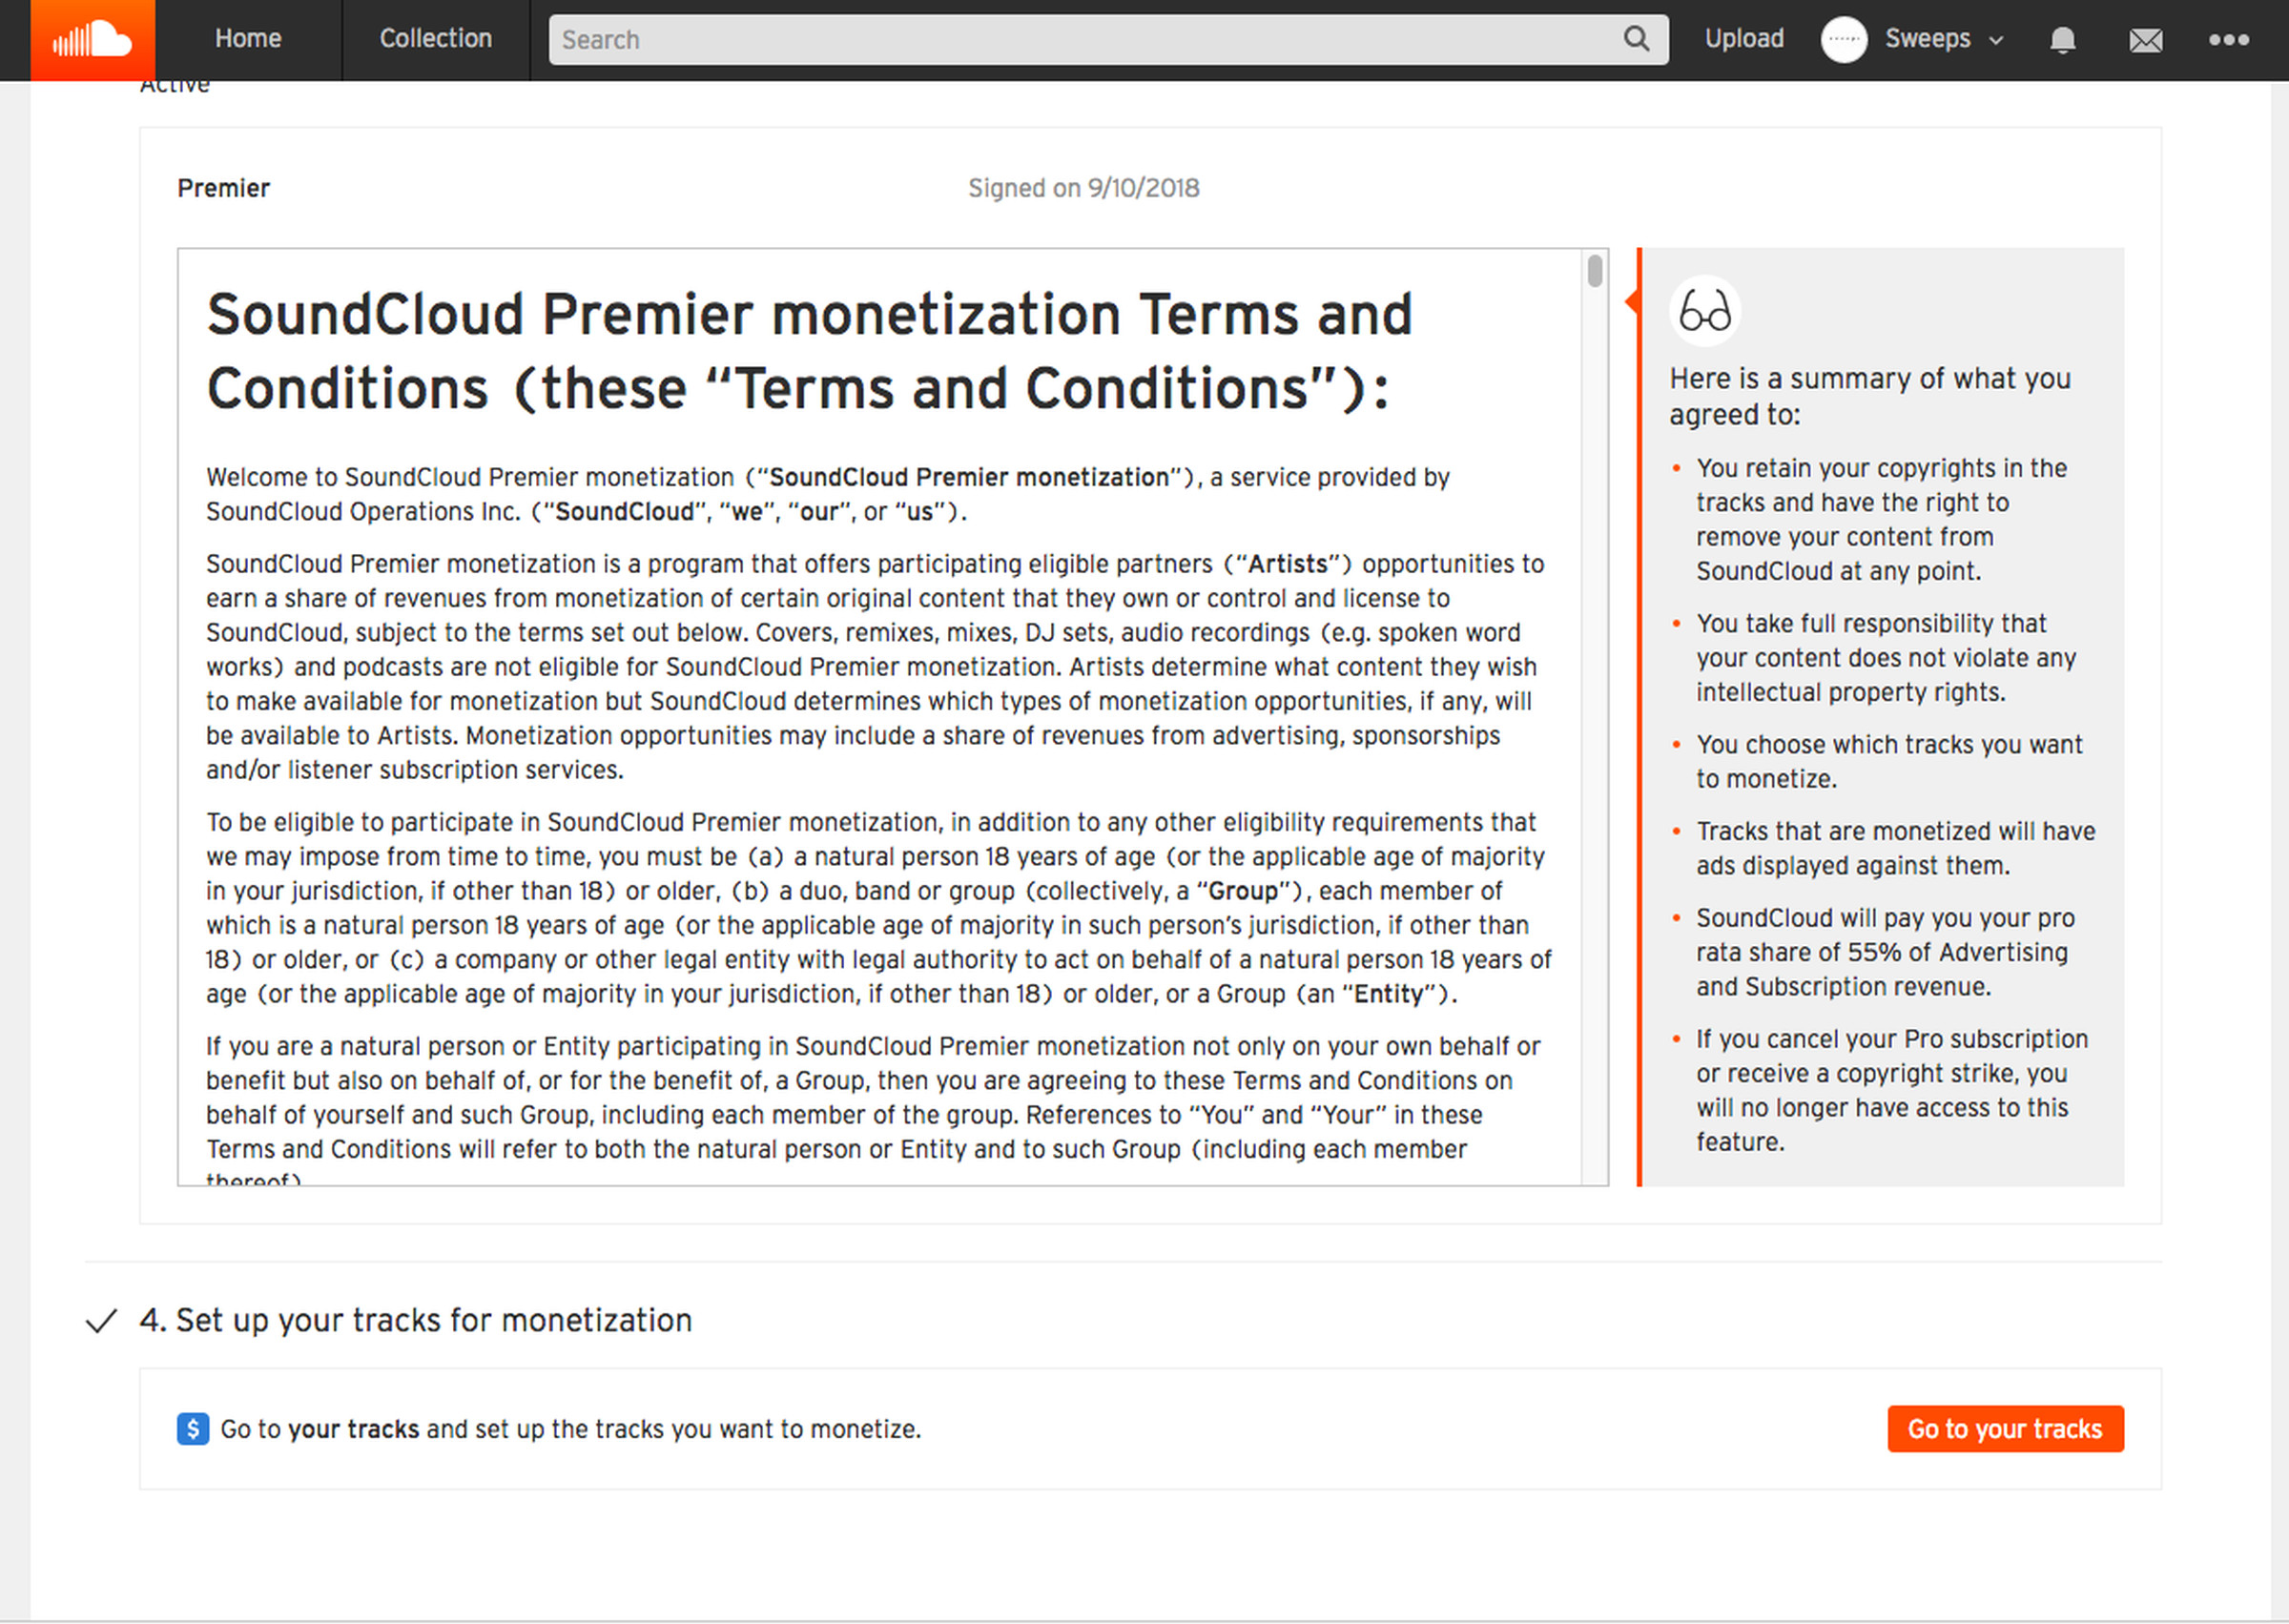 What a Premier member sees when checking the terms and conditions on SoundCloud’s website